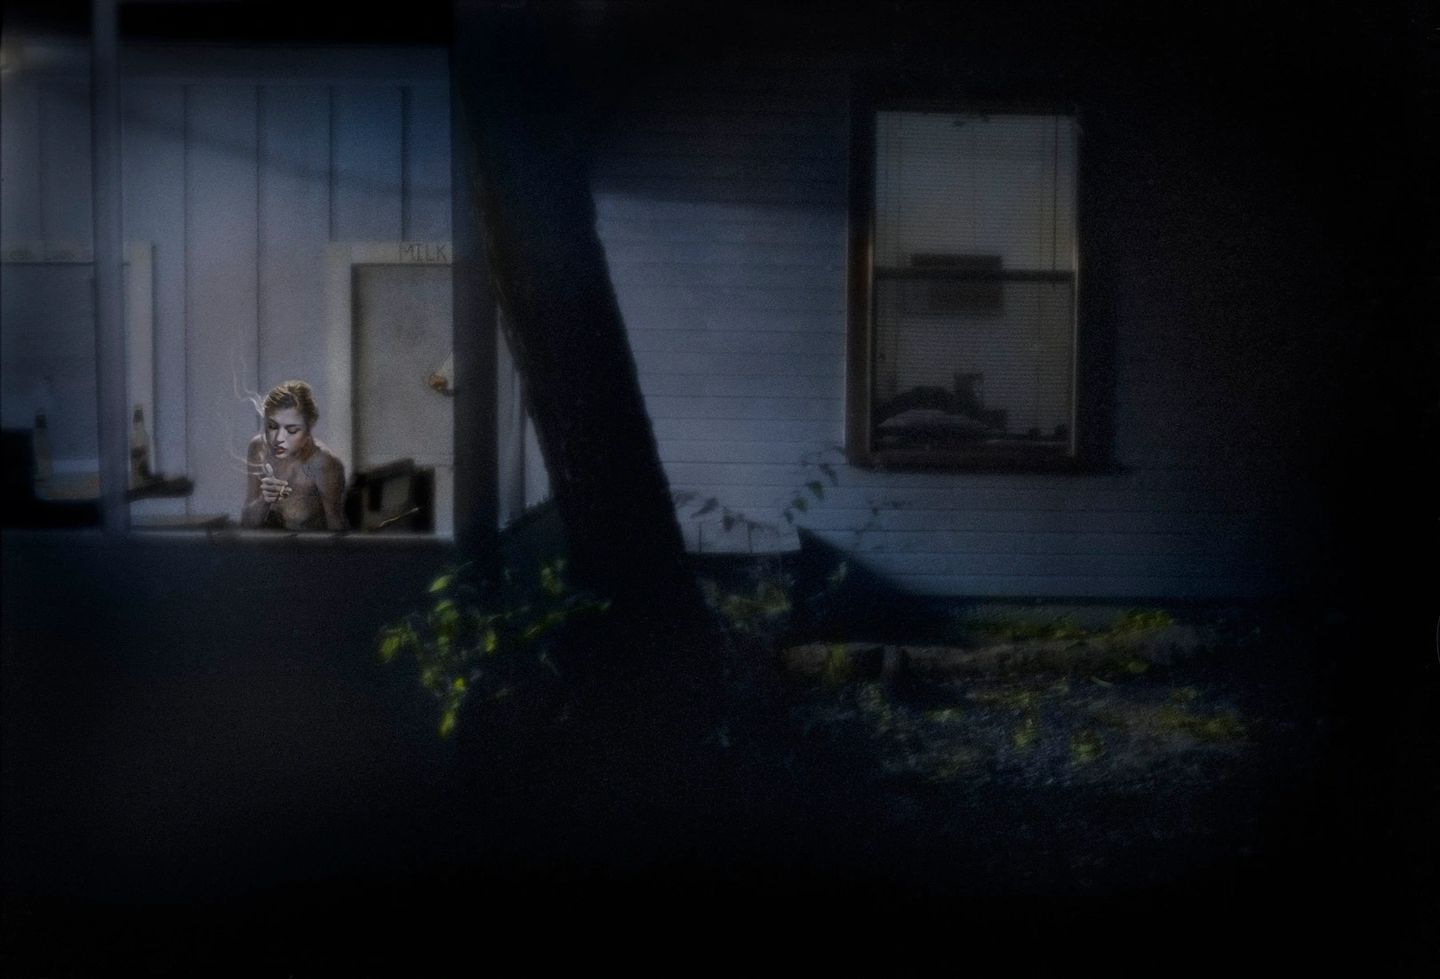 A person sitting in front of a window at night.